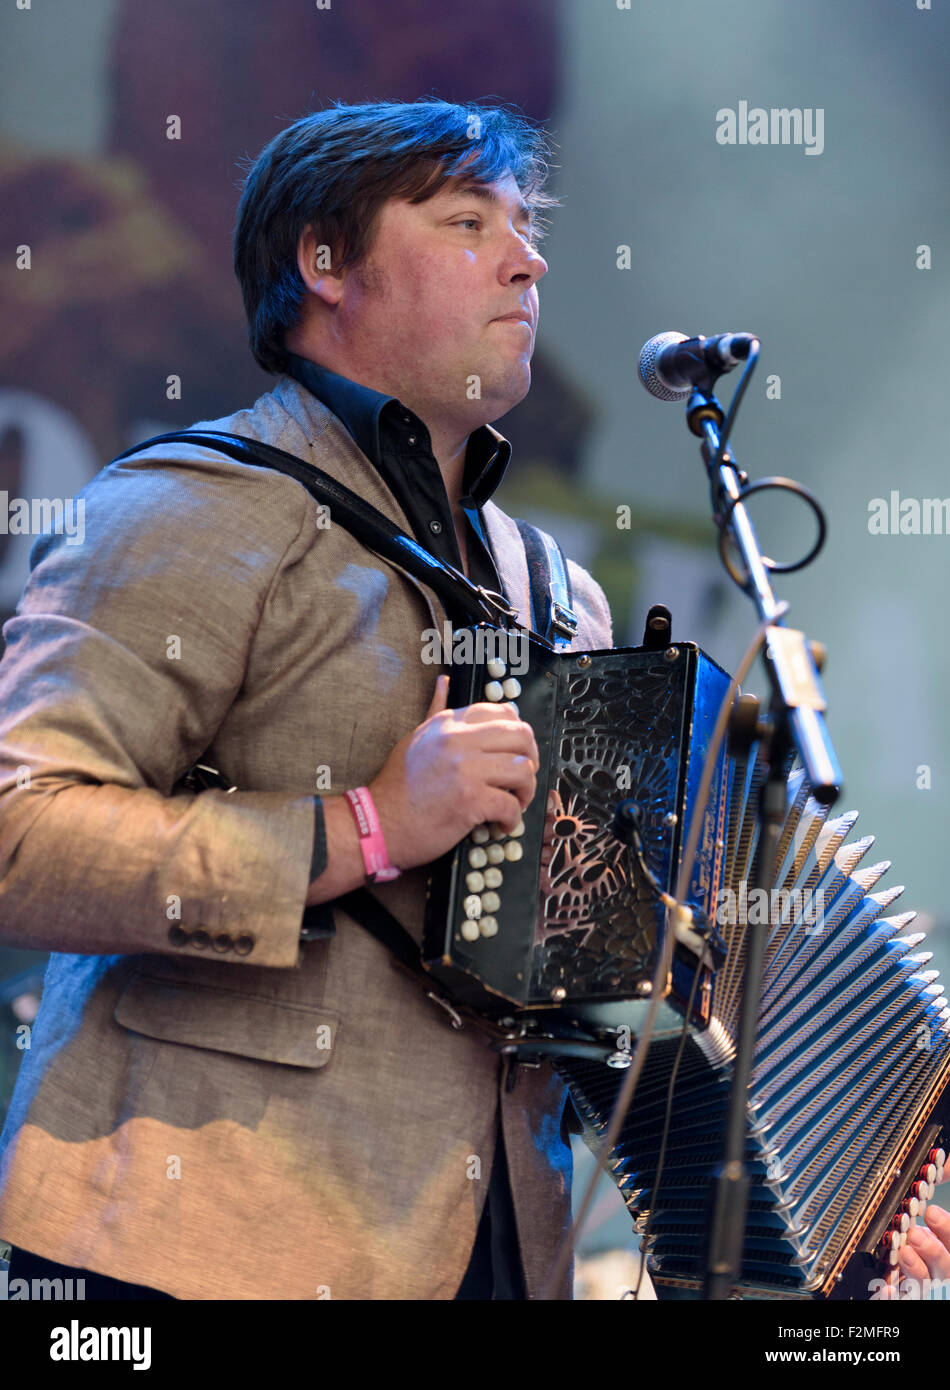 John Spiers performing with Bellowhead at Womad 2015, Charlton Park, Malmesbury, England, UK, 24th July 2015 Stock Photo